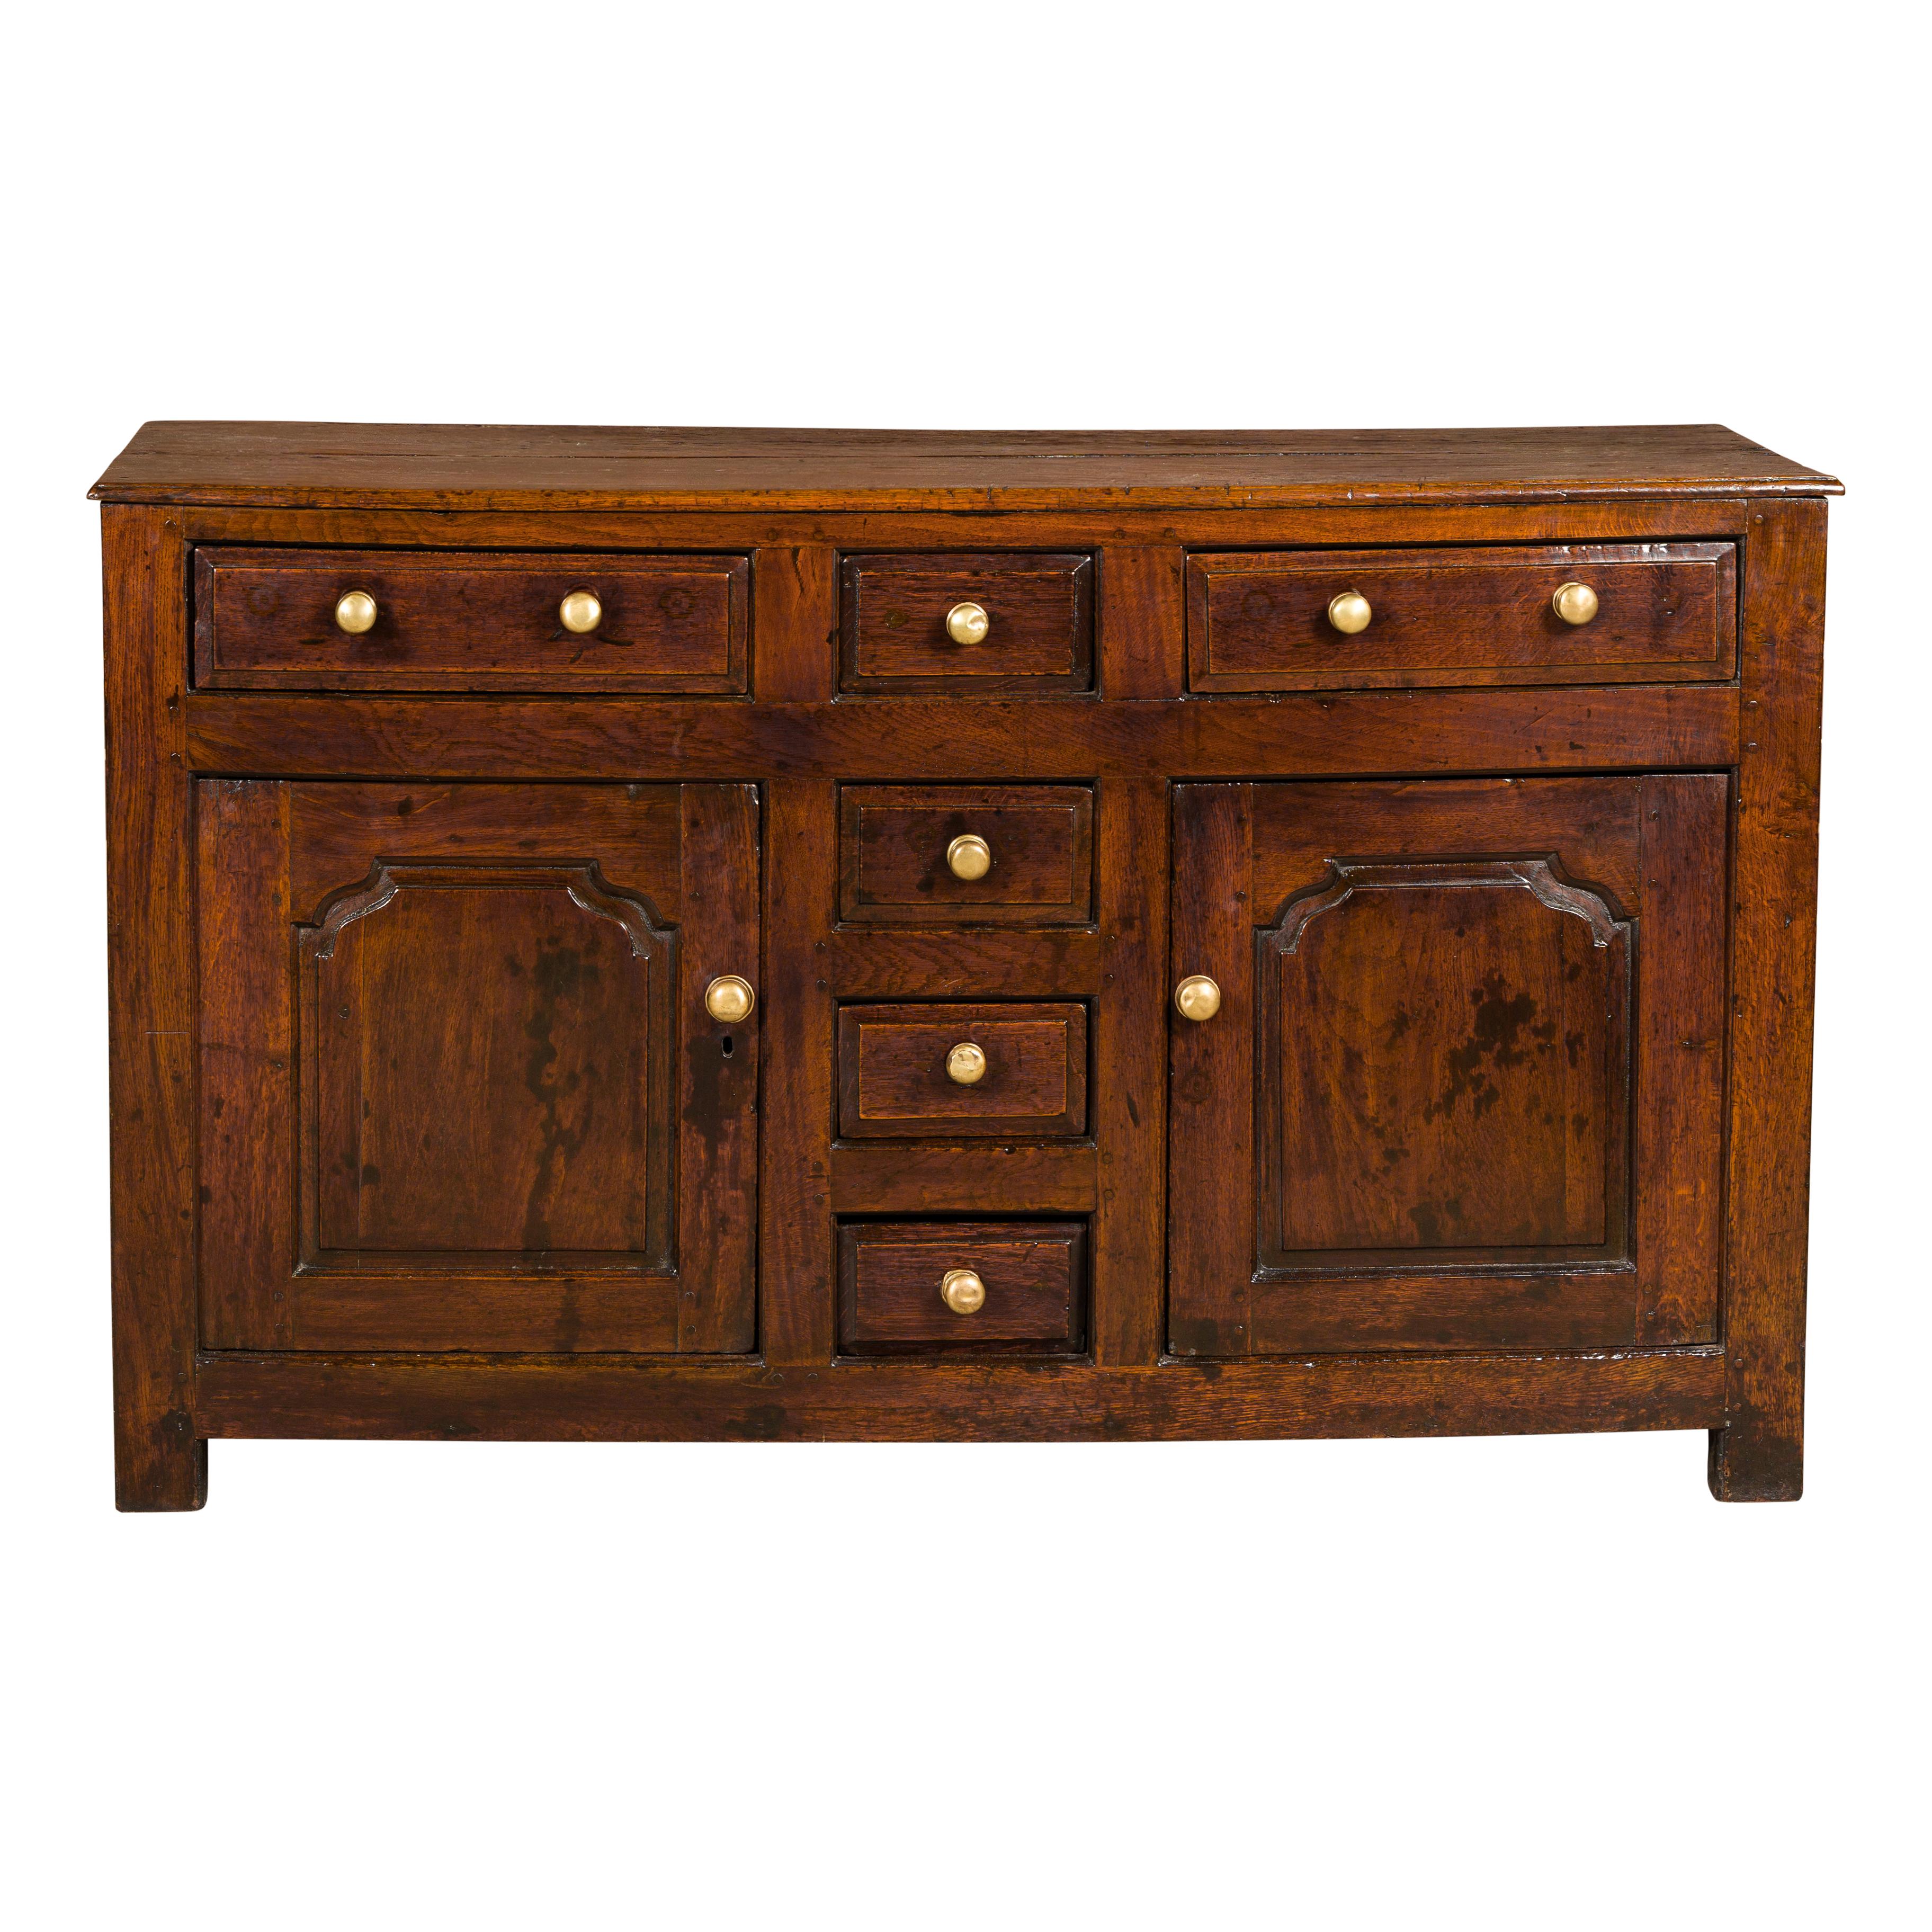 English George III Period 1800s Oak Buffet with Six Drawers and Two Doors For Sale 10